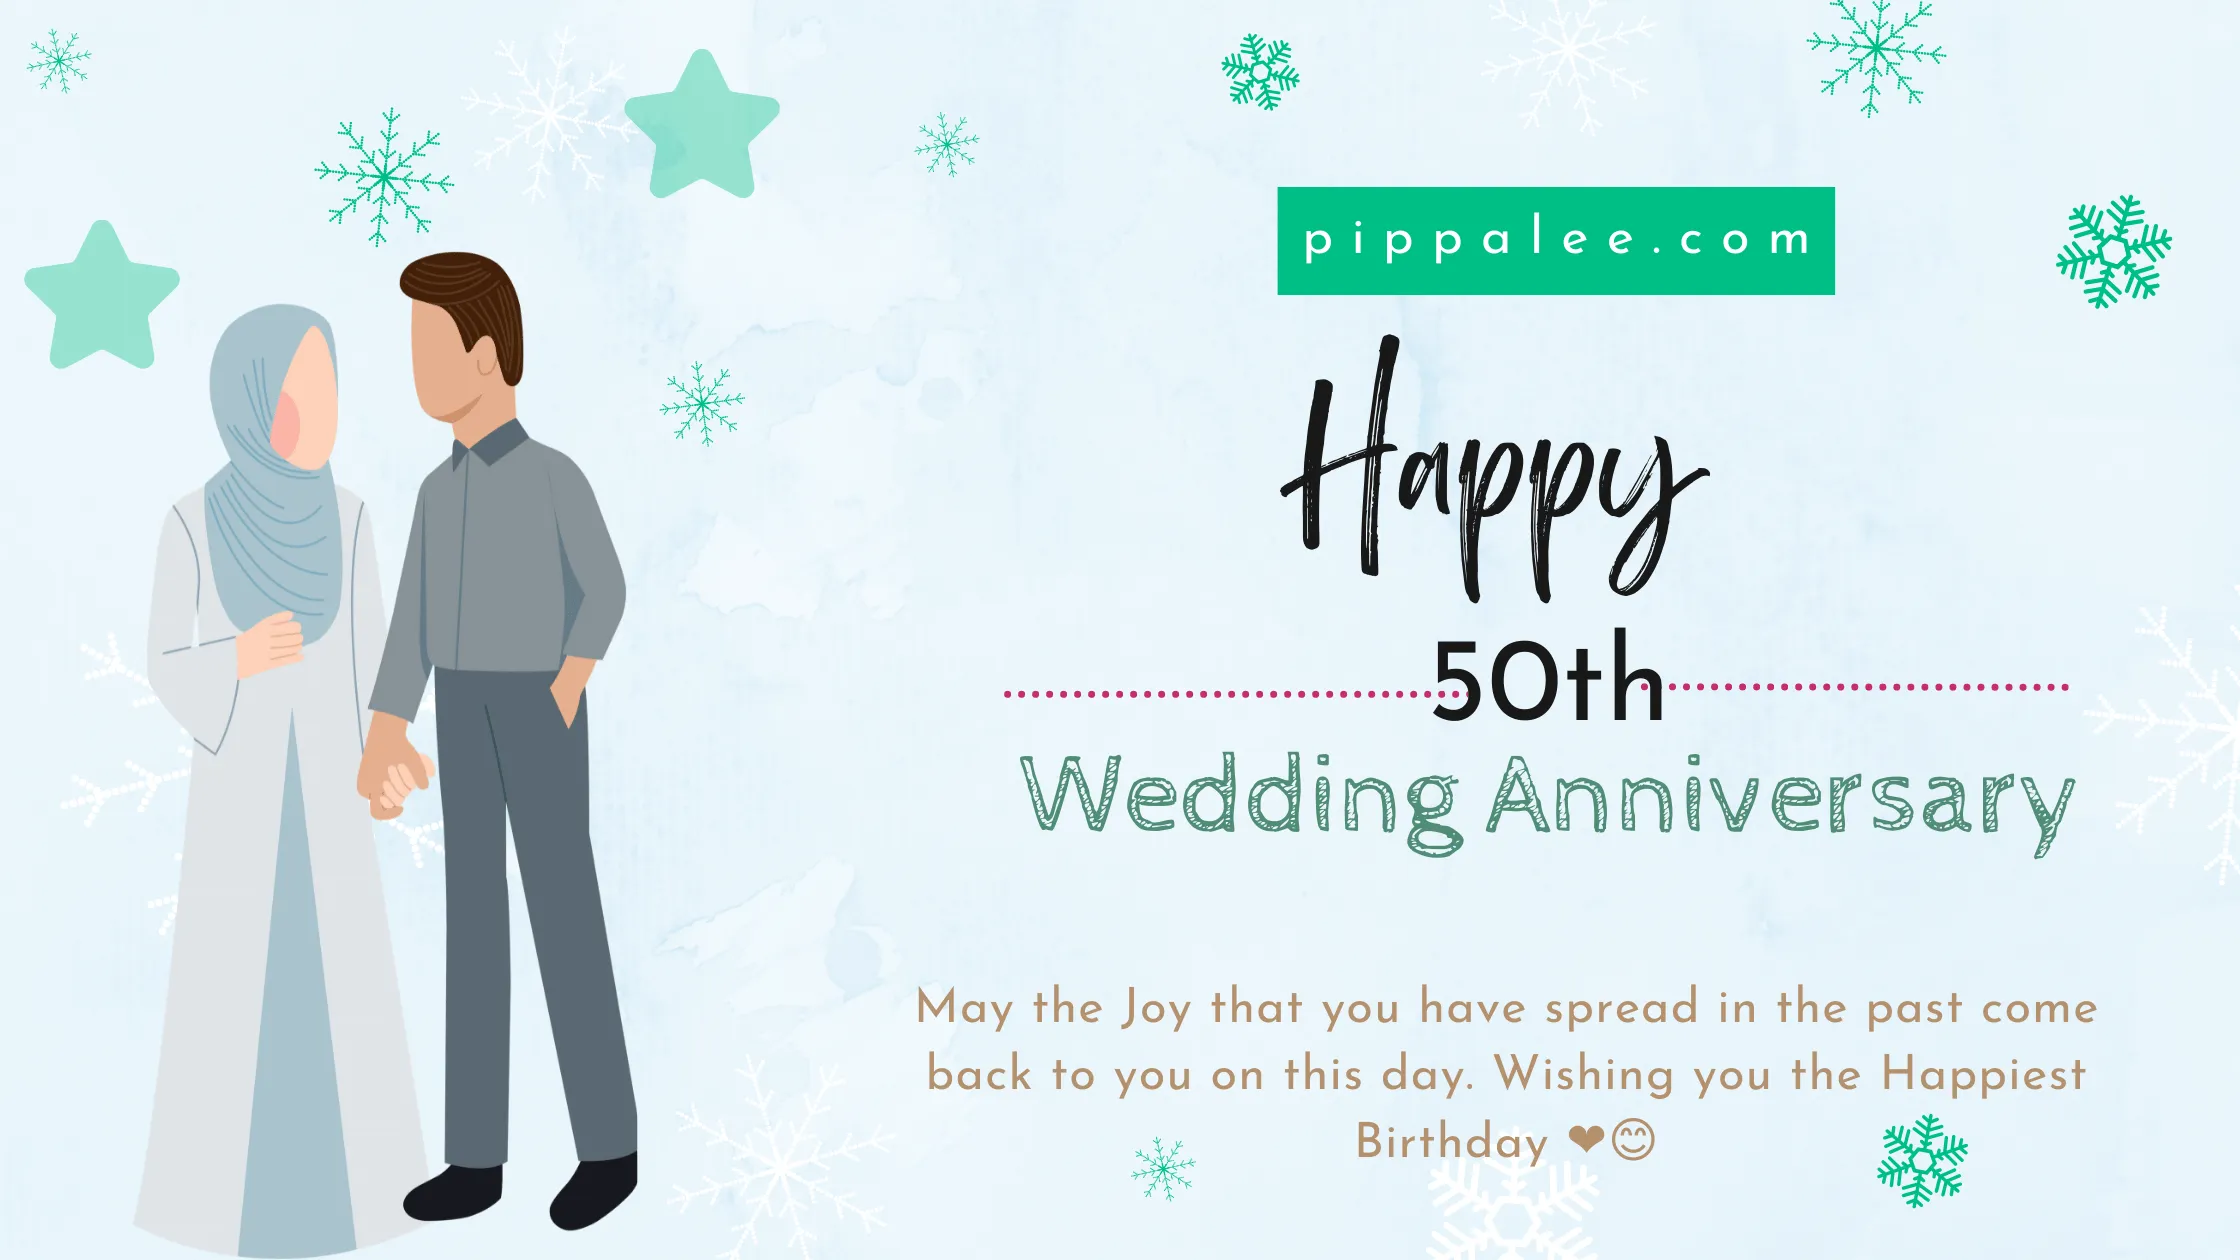 50th Wedding Anniversary - Wishes & Messages